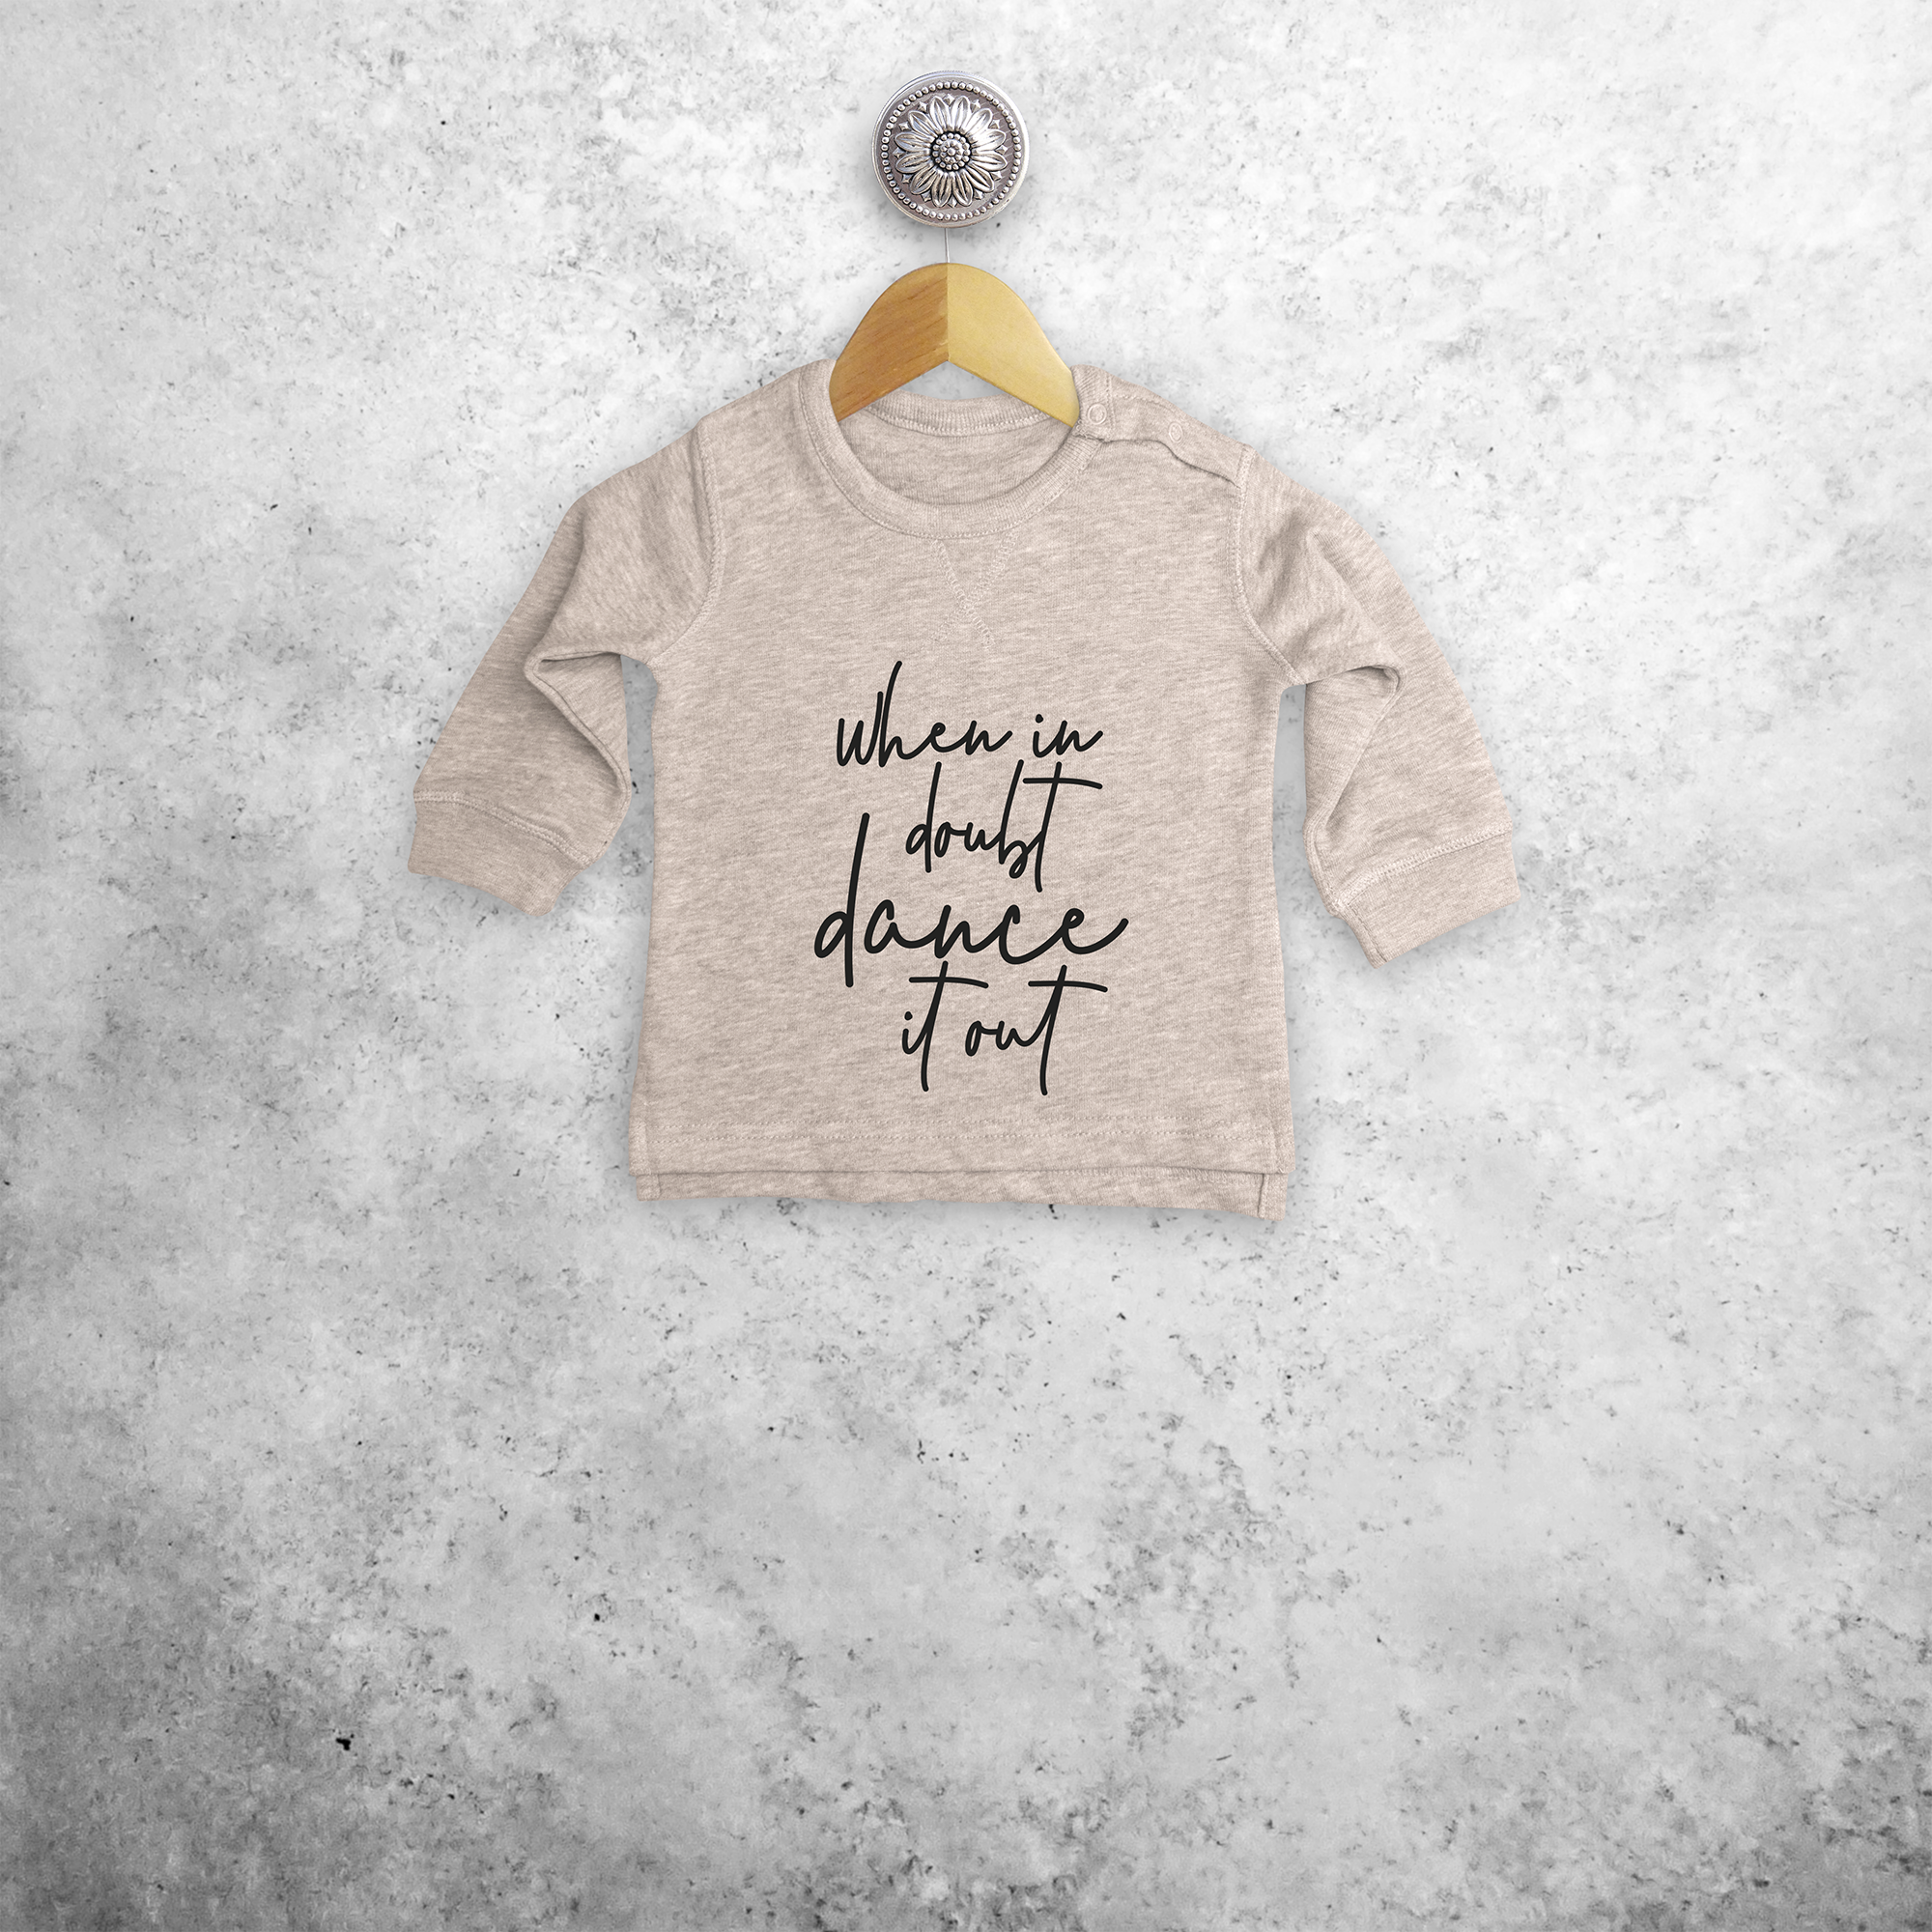 'When in doubt dance it out' baby trui